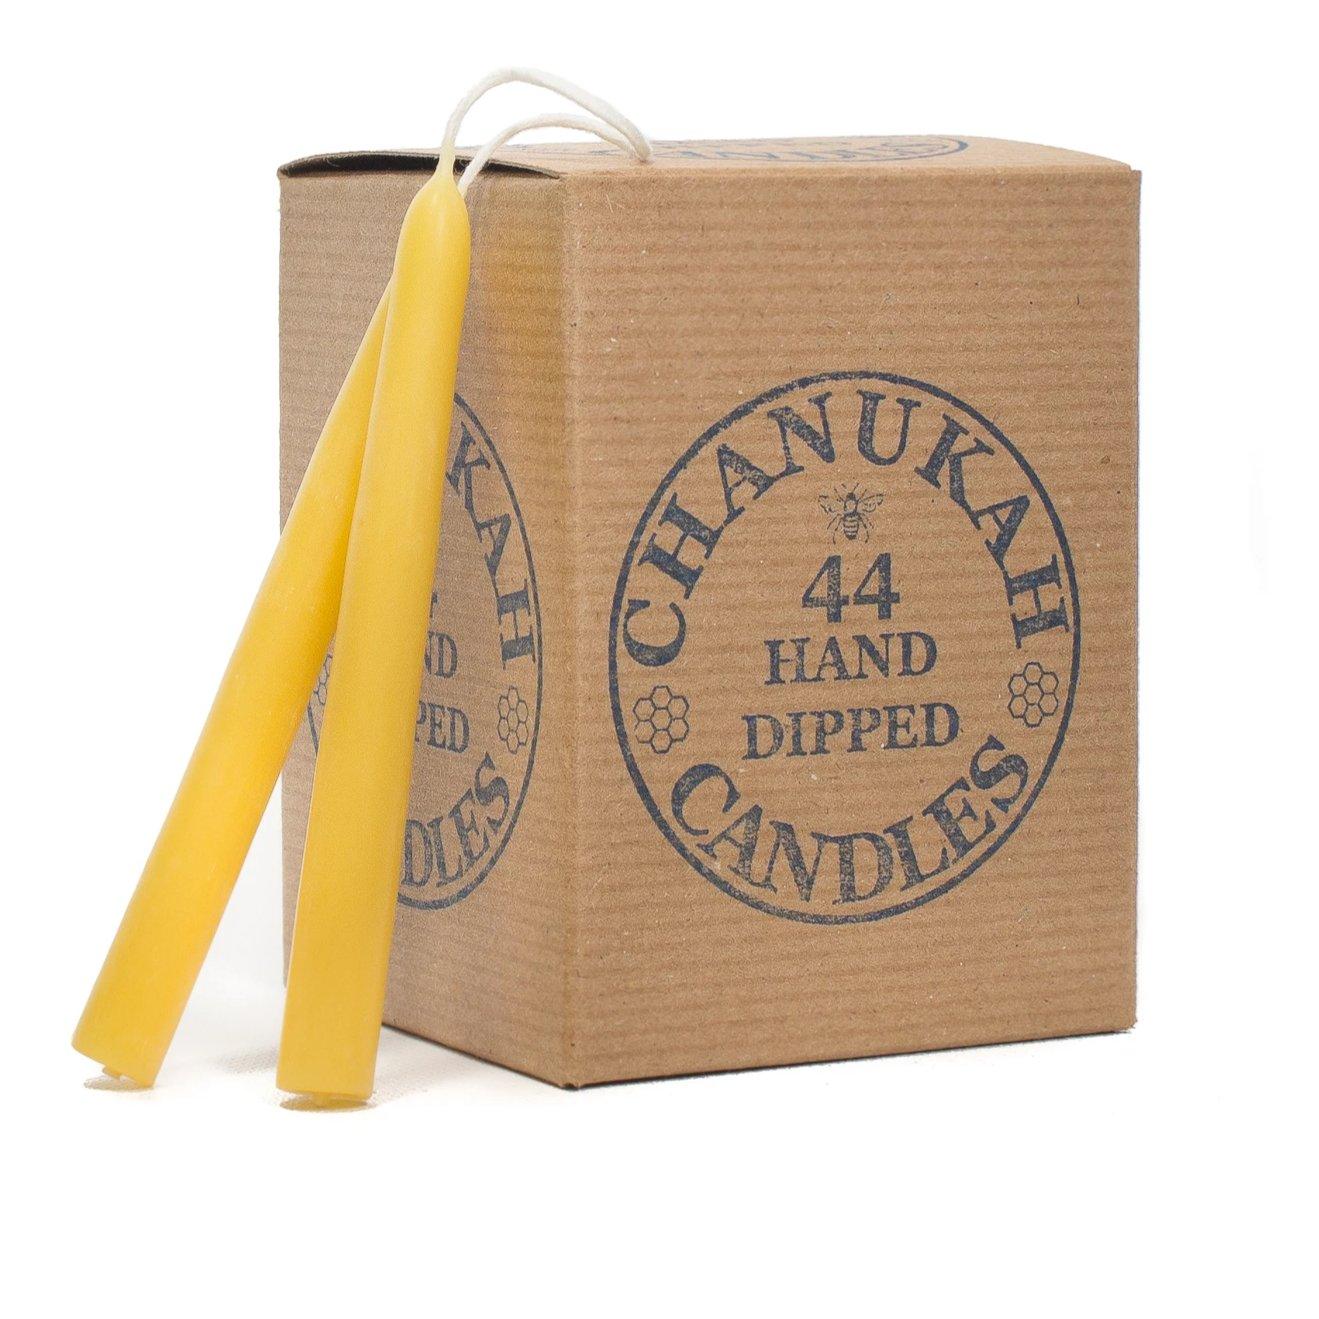 Pure Beeswax - Chanukah Candles - Bluecorn Candles